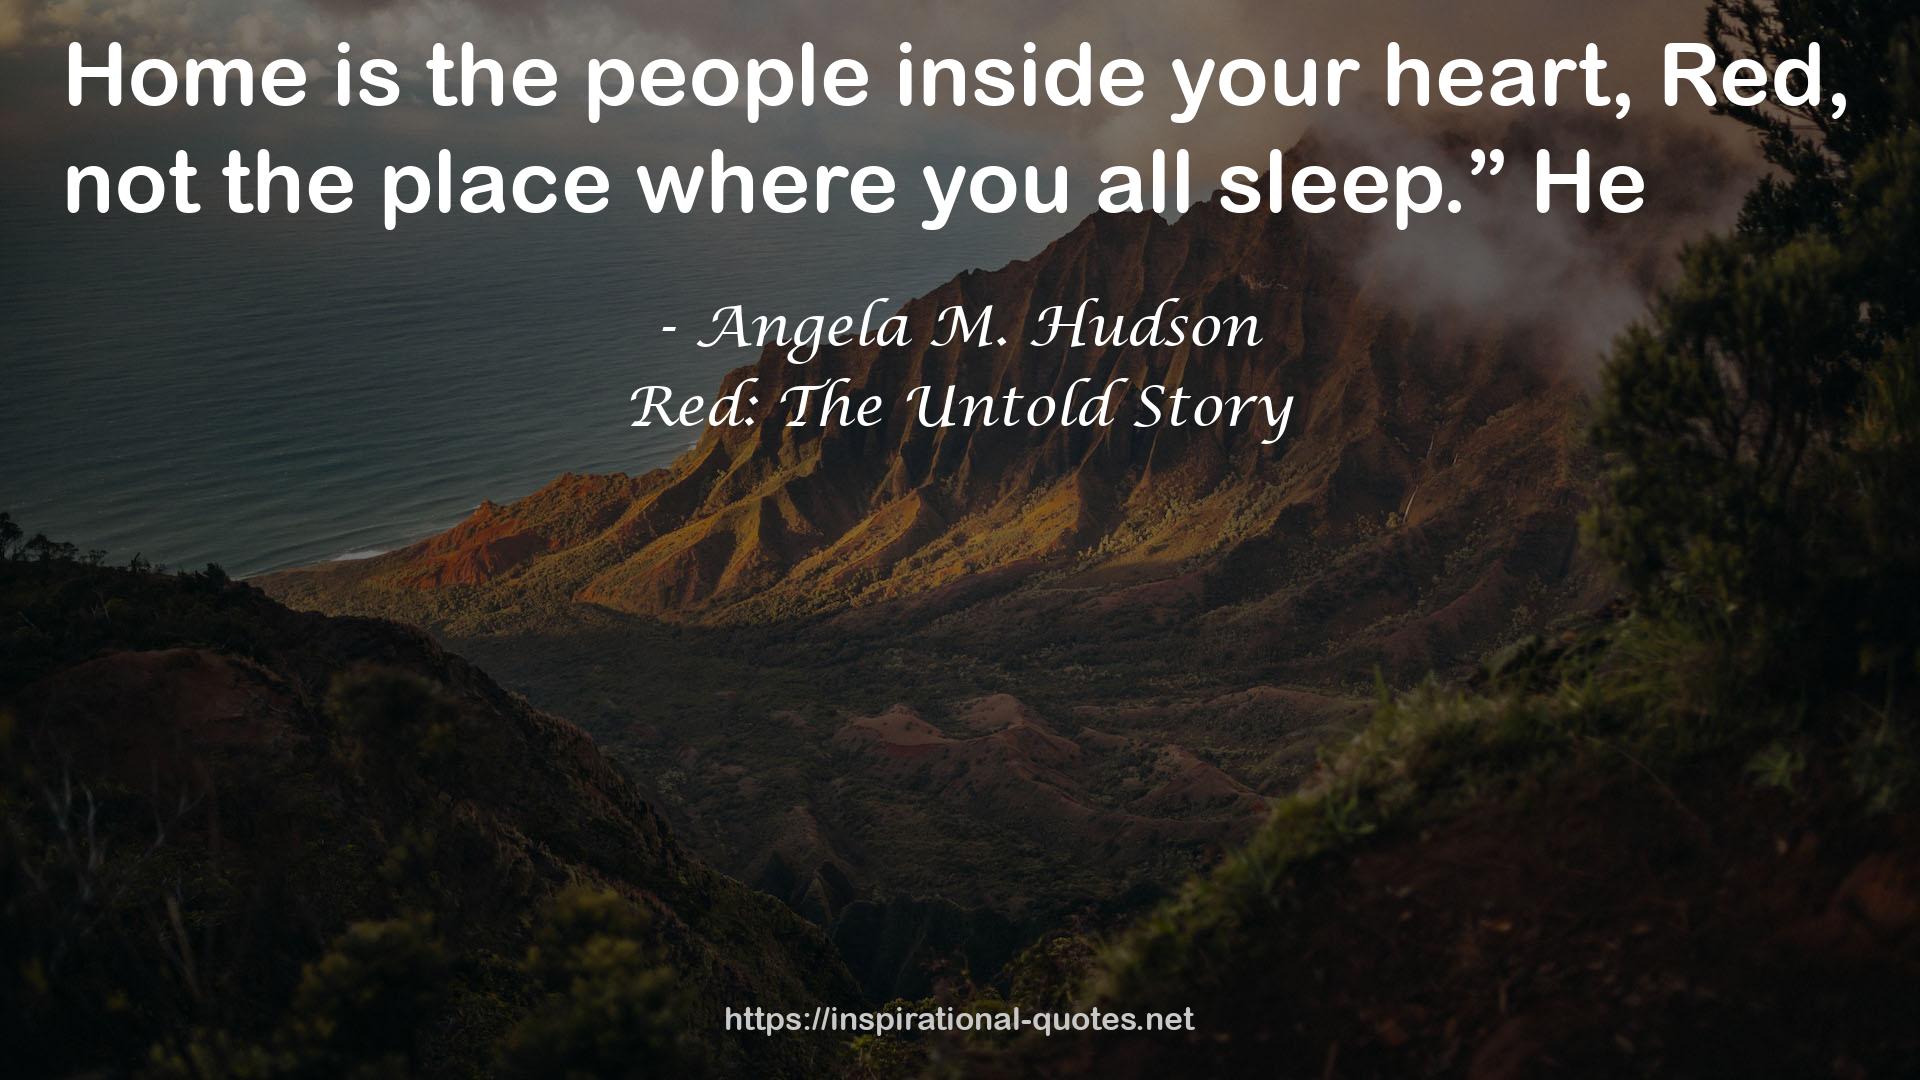 Red: The Untold Story QUOTES